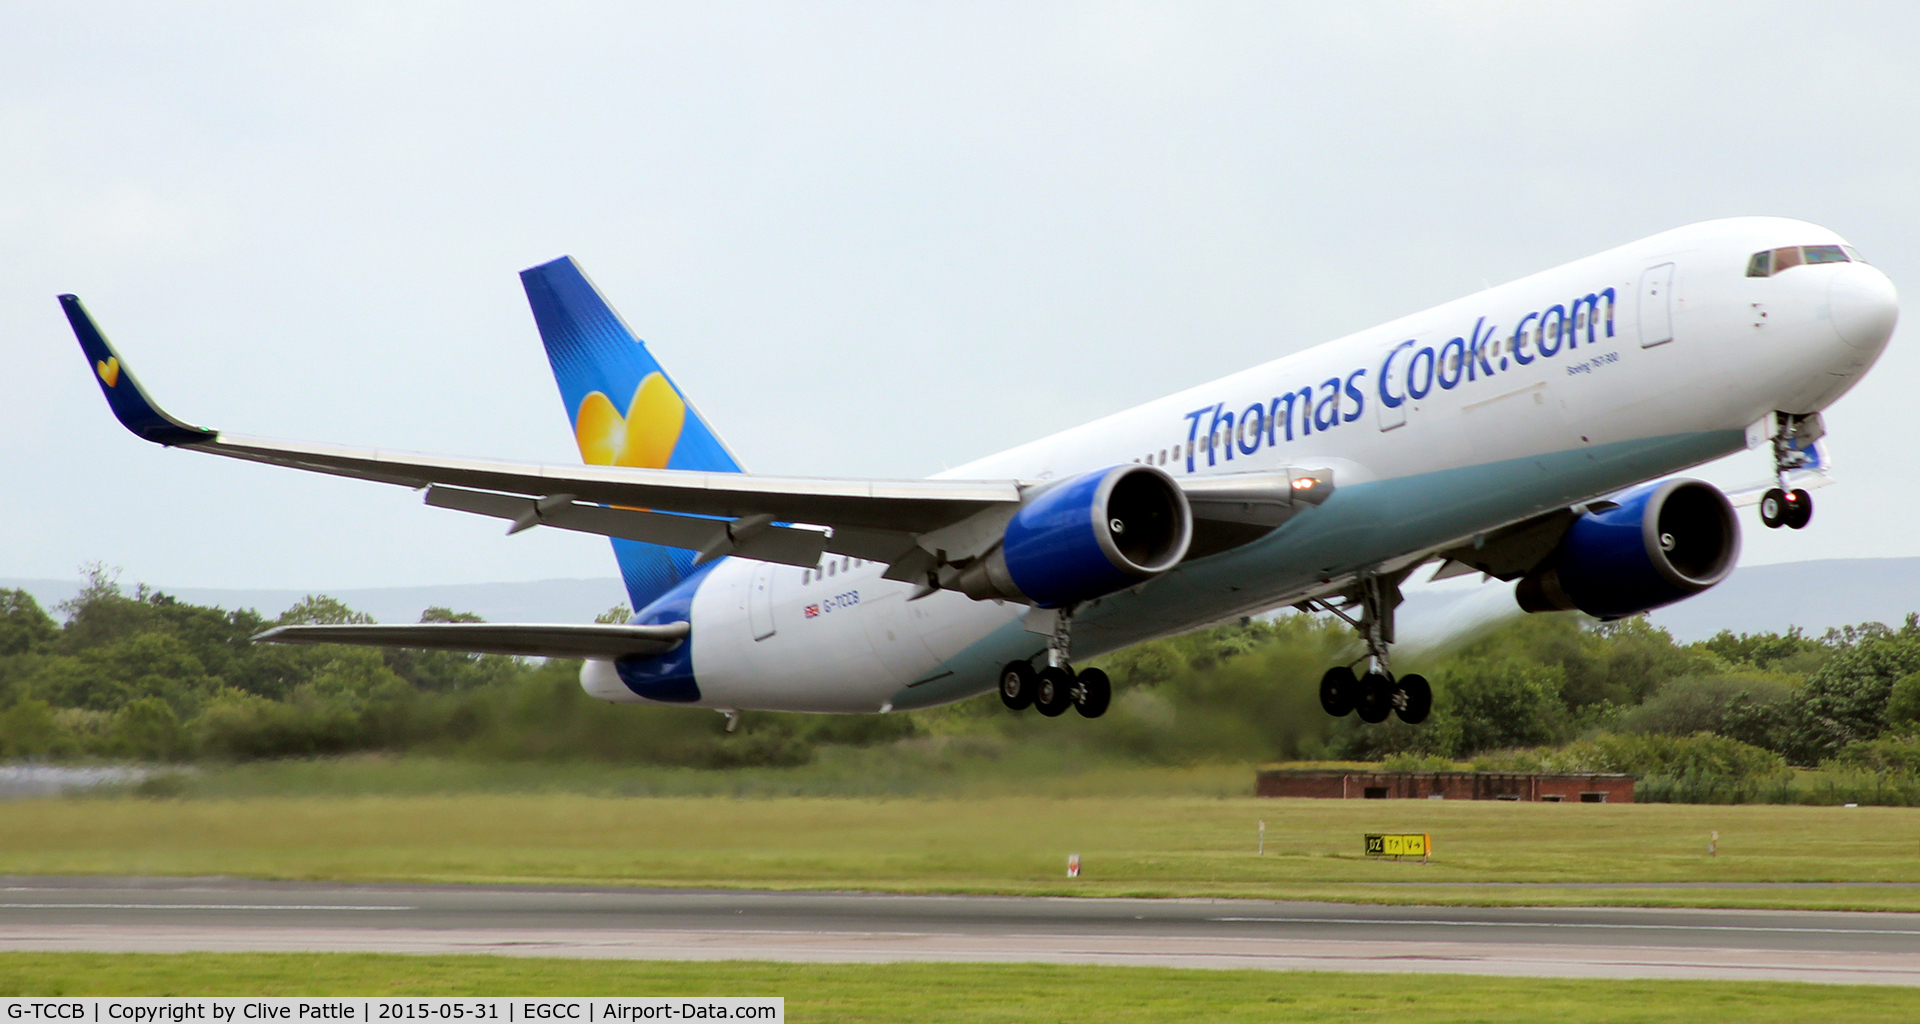 G-TCCB, 1997 Boeing 767-31K C/N 28865, Thomas Cook in action at Manchester EGCC